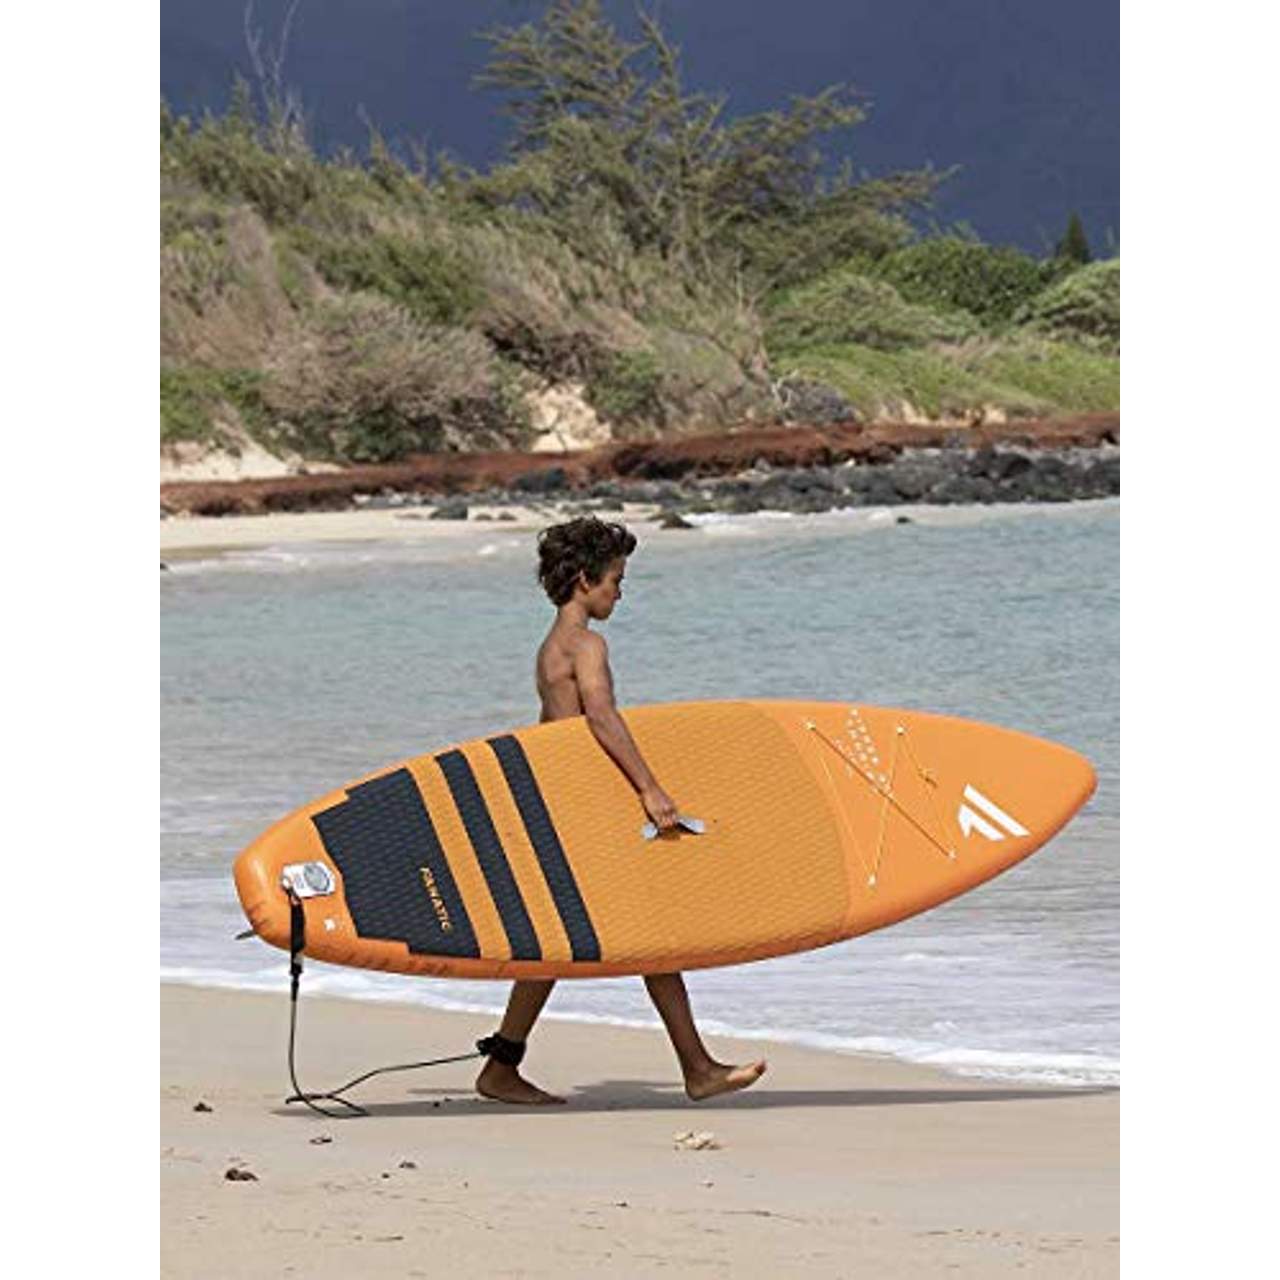 Fanatic 10'0 Touring Air Kinder Inflatable SUP  